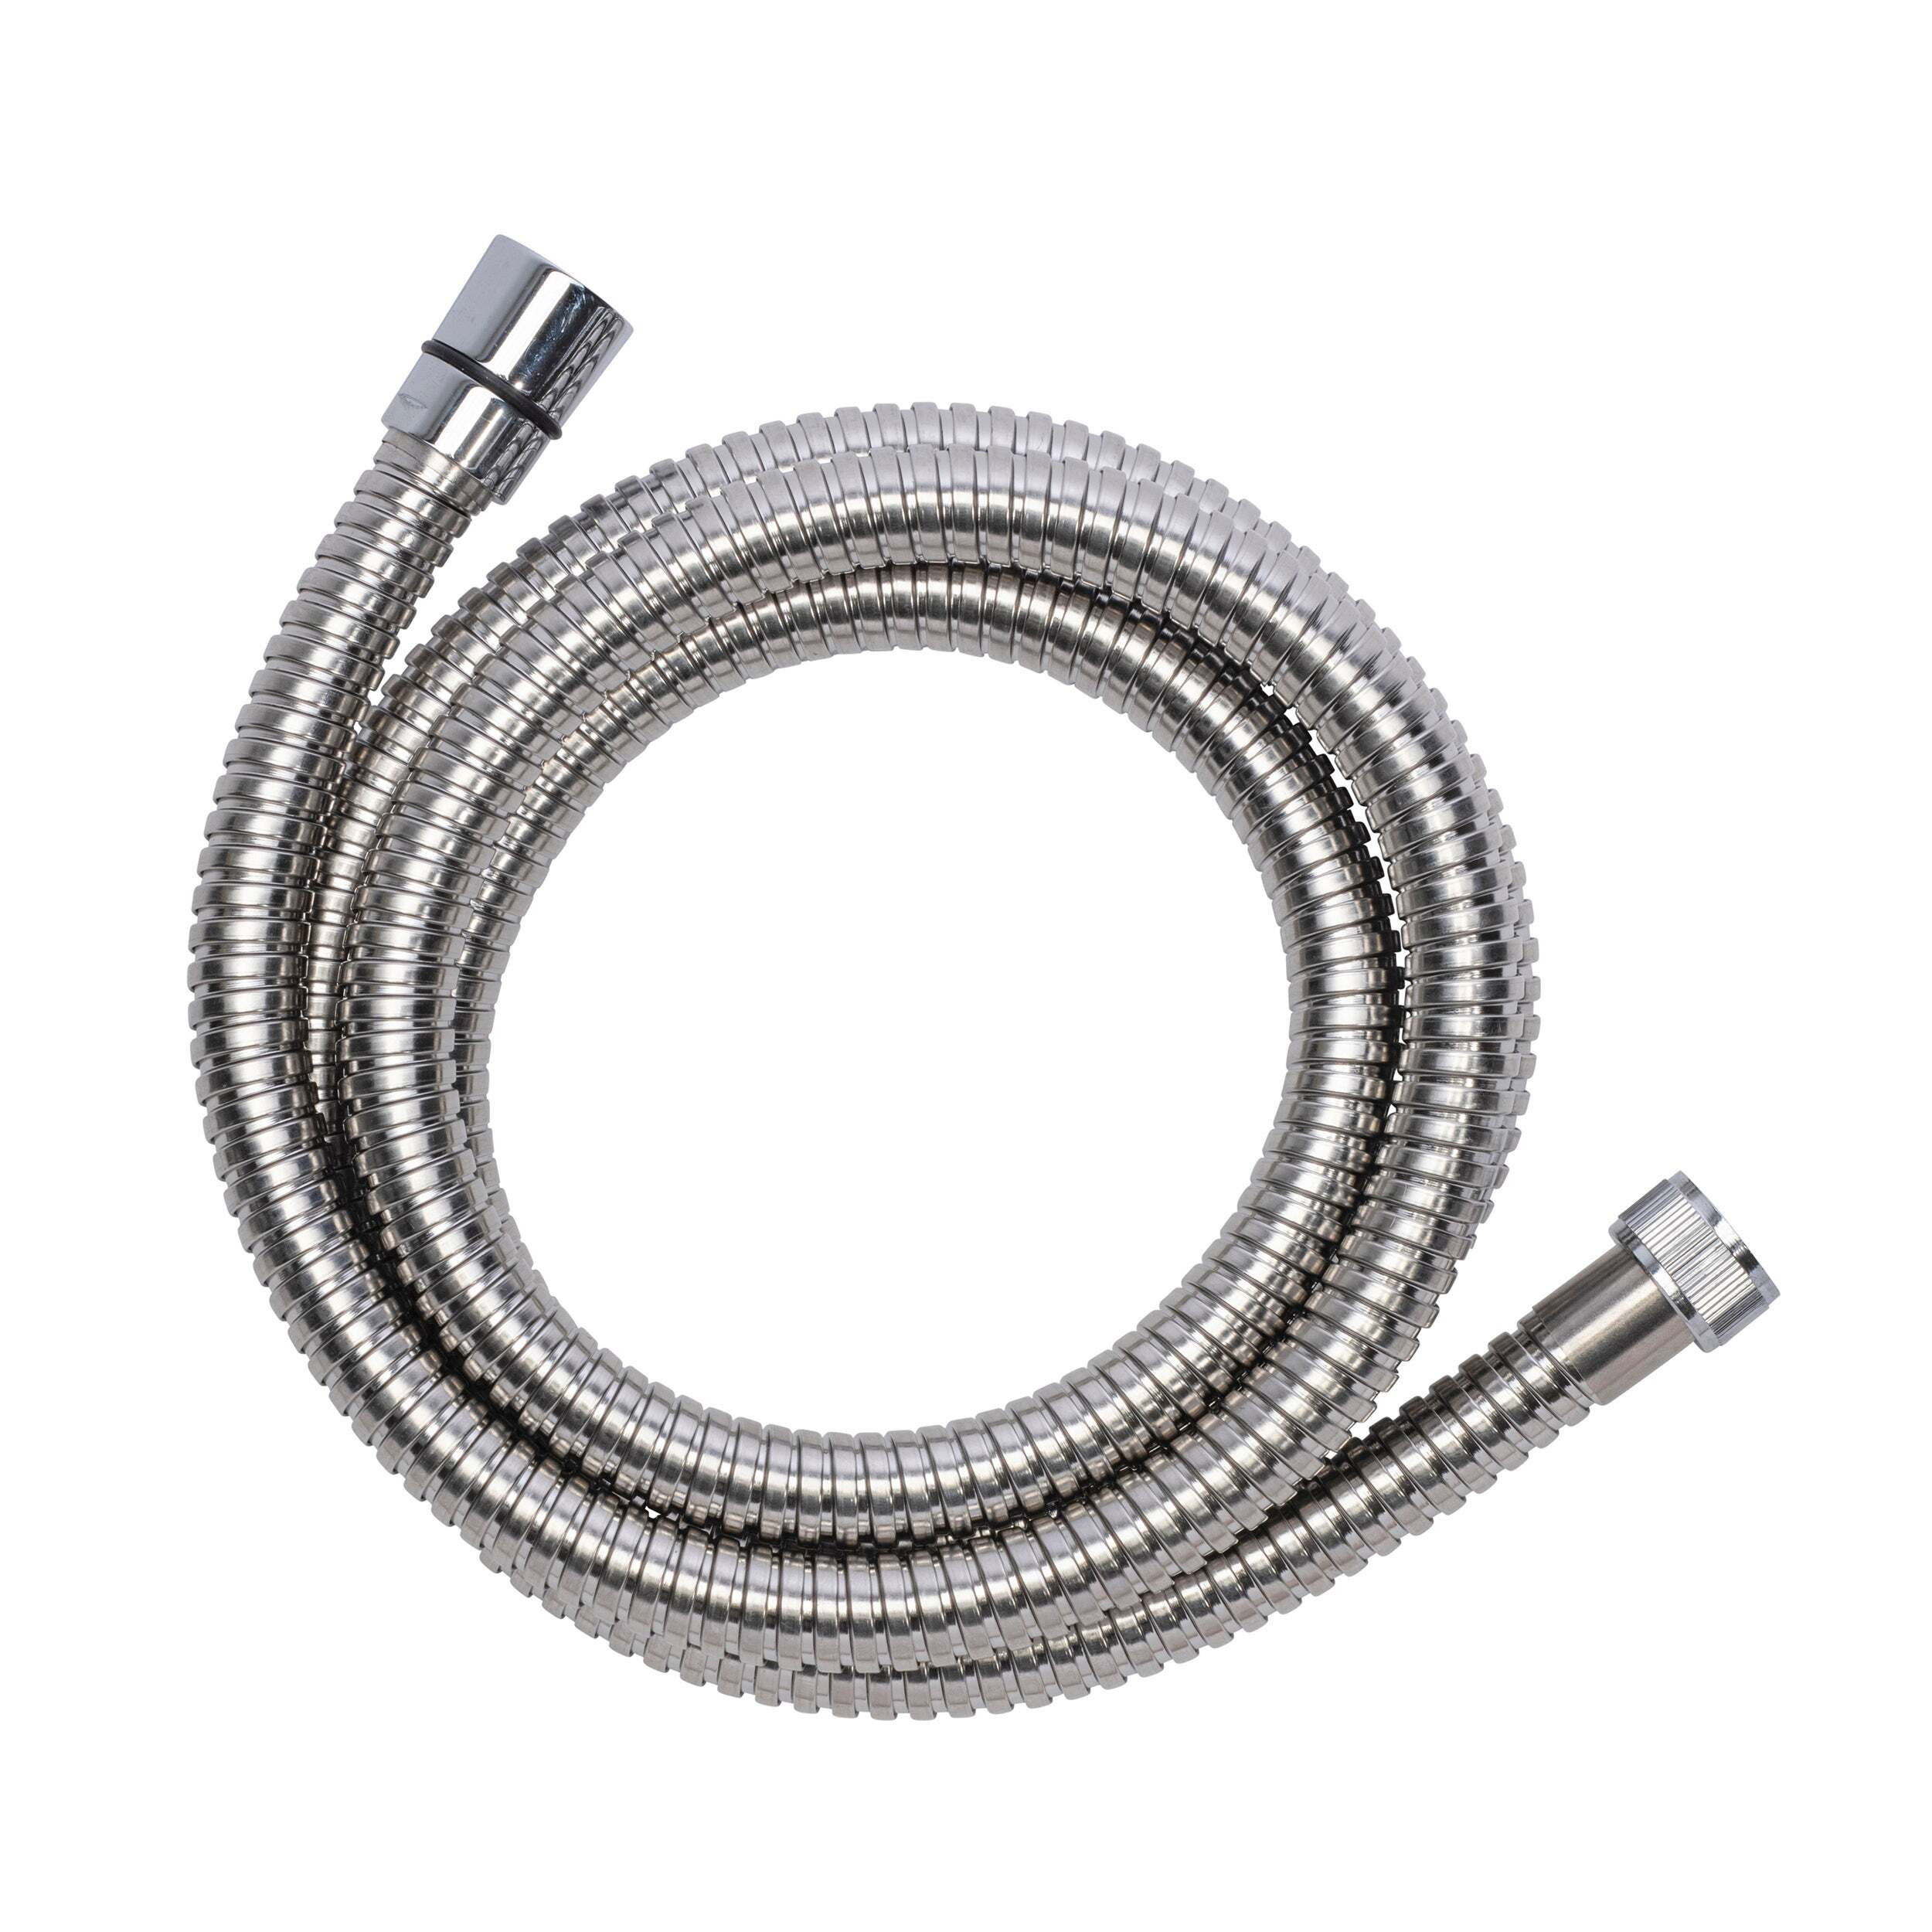 1.75m Reinforced Stainless Steel Shower Hose, 11mm Bore Silver